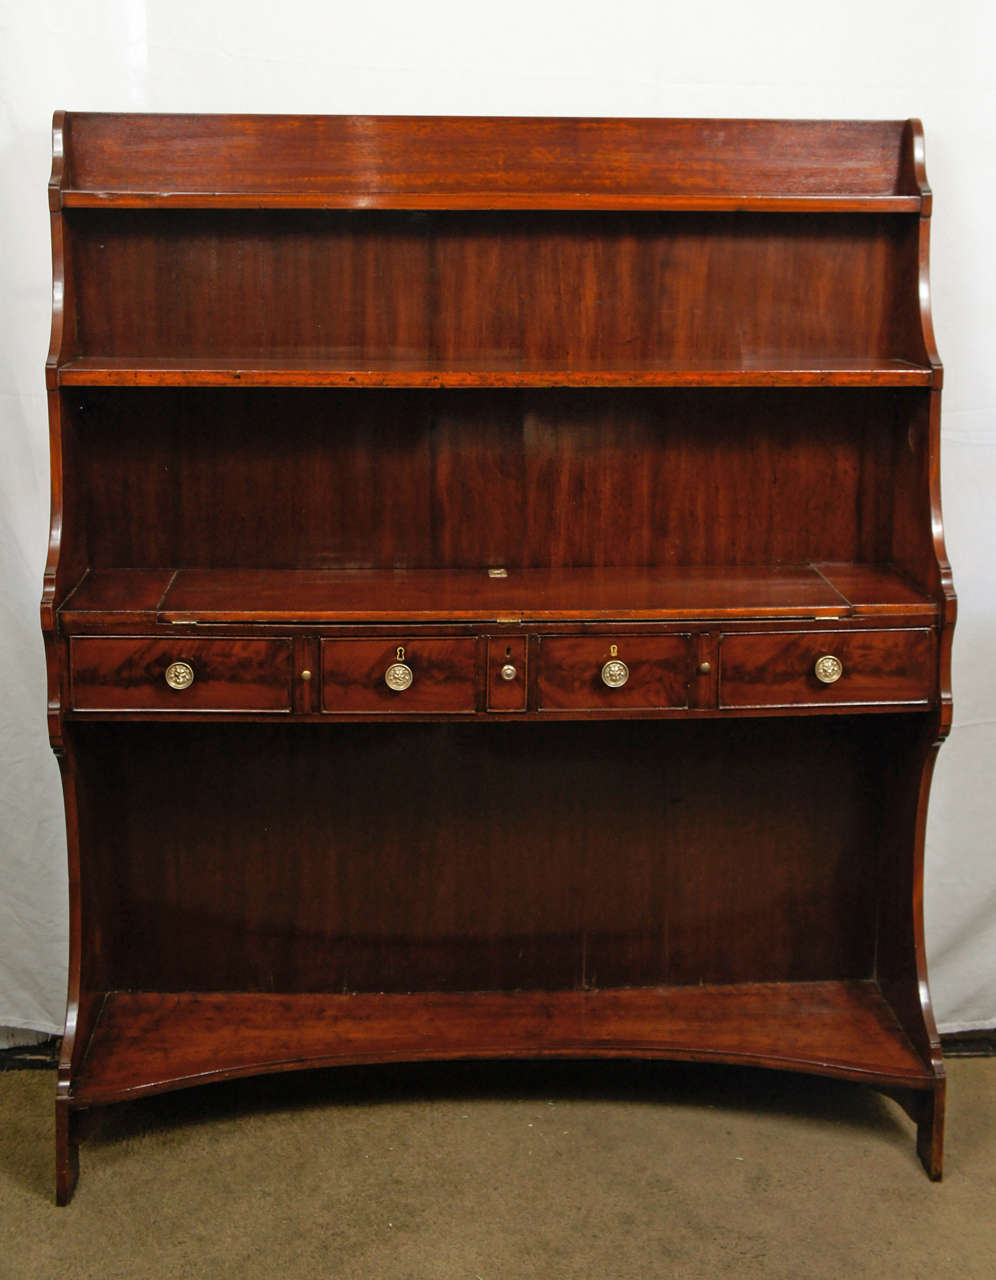 This finely made English regency period metamorphic bookcase-desk is also of an interesting and useful small scale. The mahogany construction is done in a clean simple straight-grained wood while the drawer fronts are enlivened with crotch mahogany